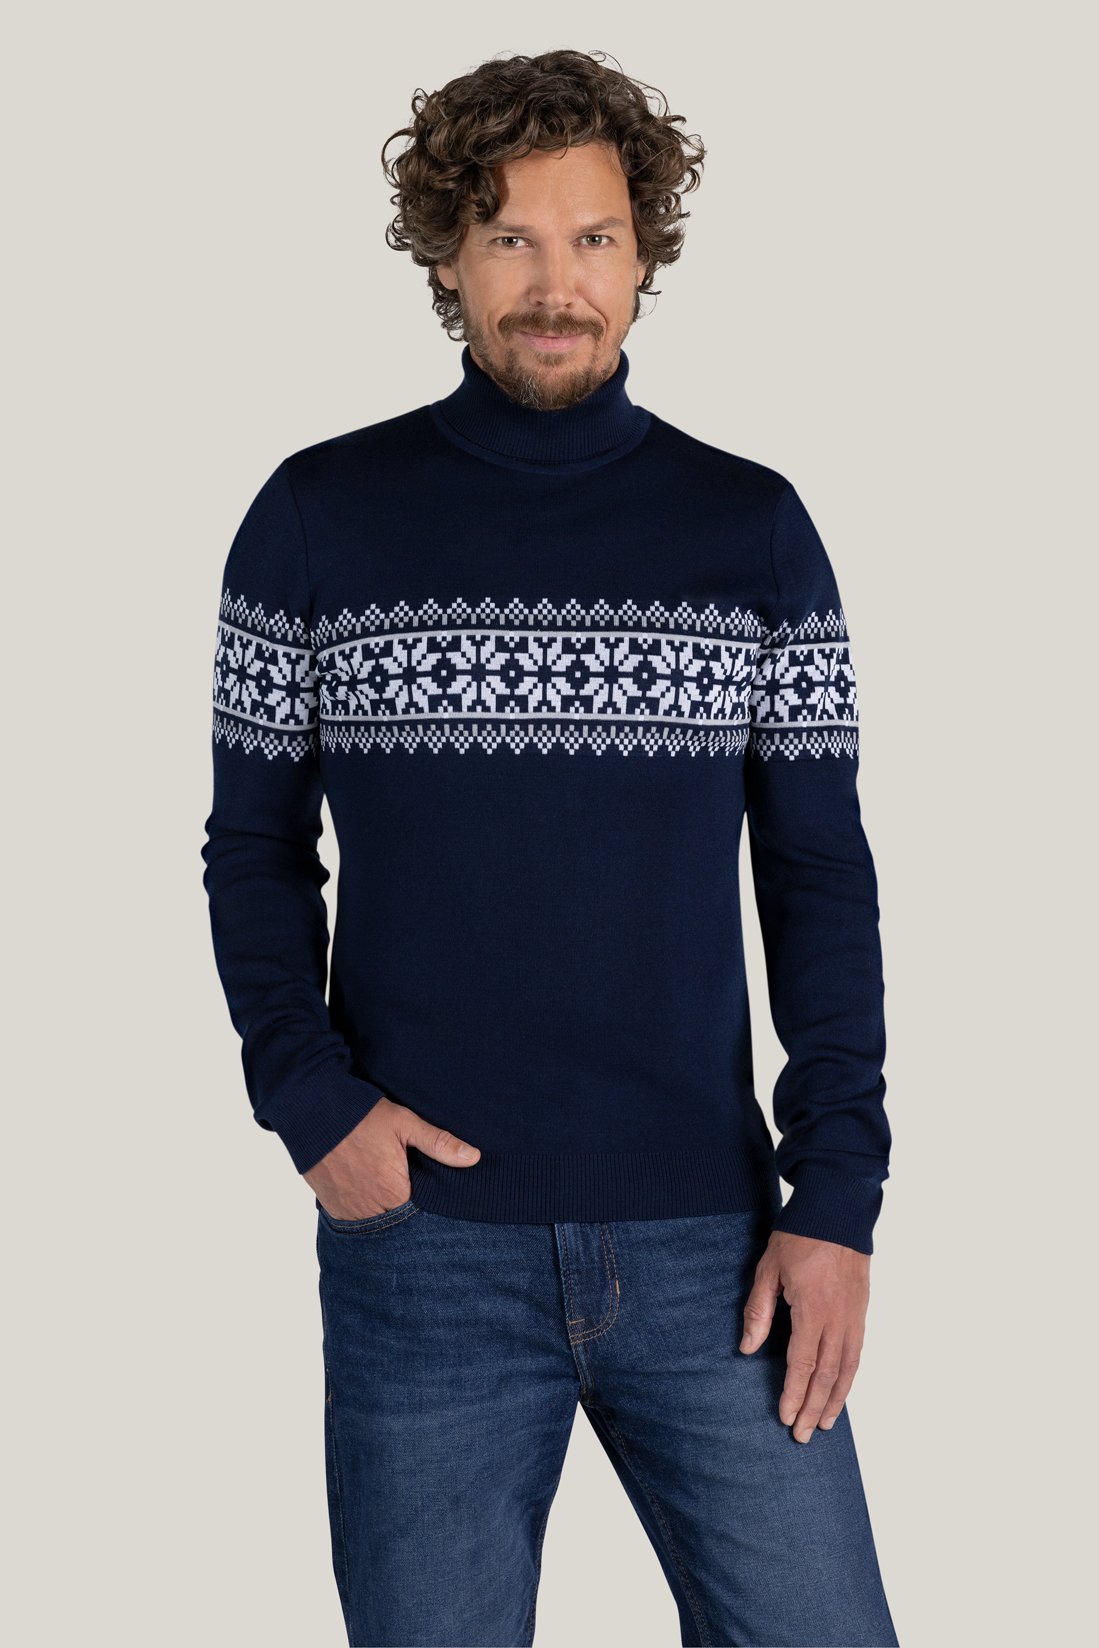 Nils turtleneck sweater in blue made of Merino and Tencel from Tidløs